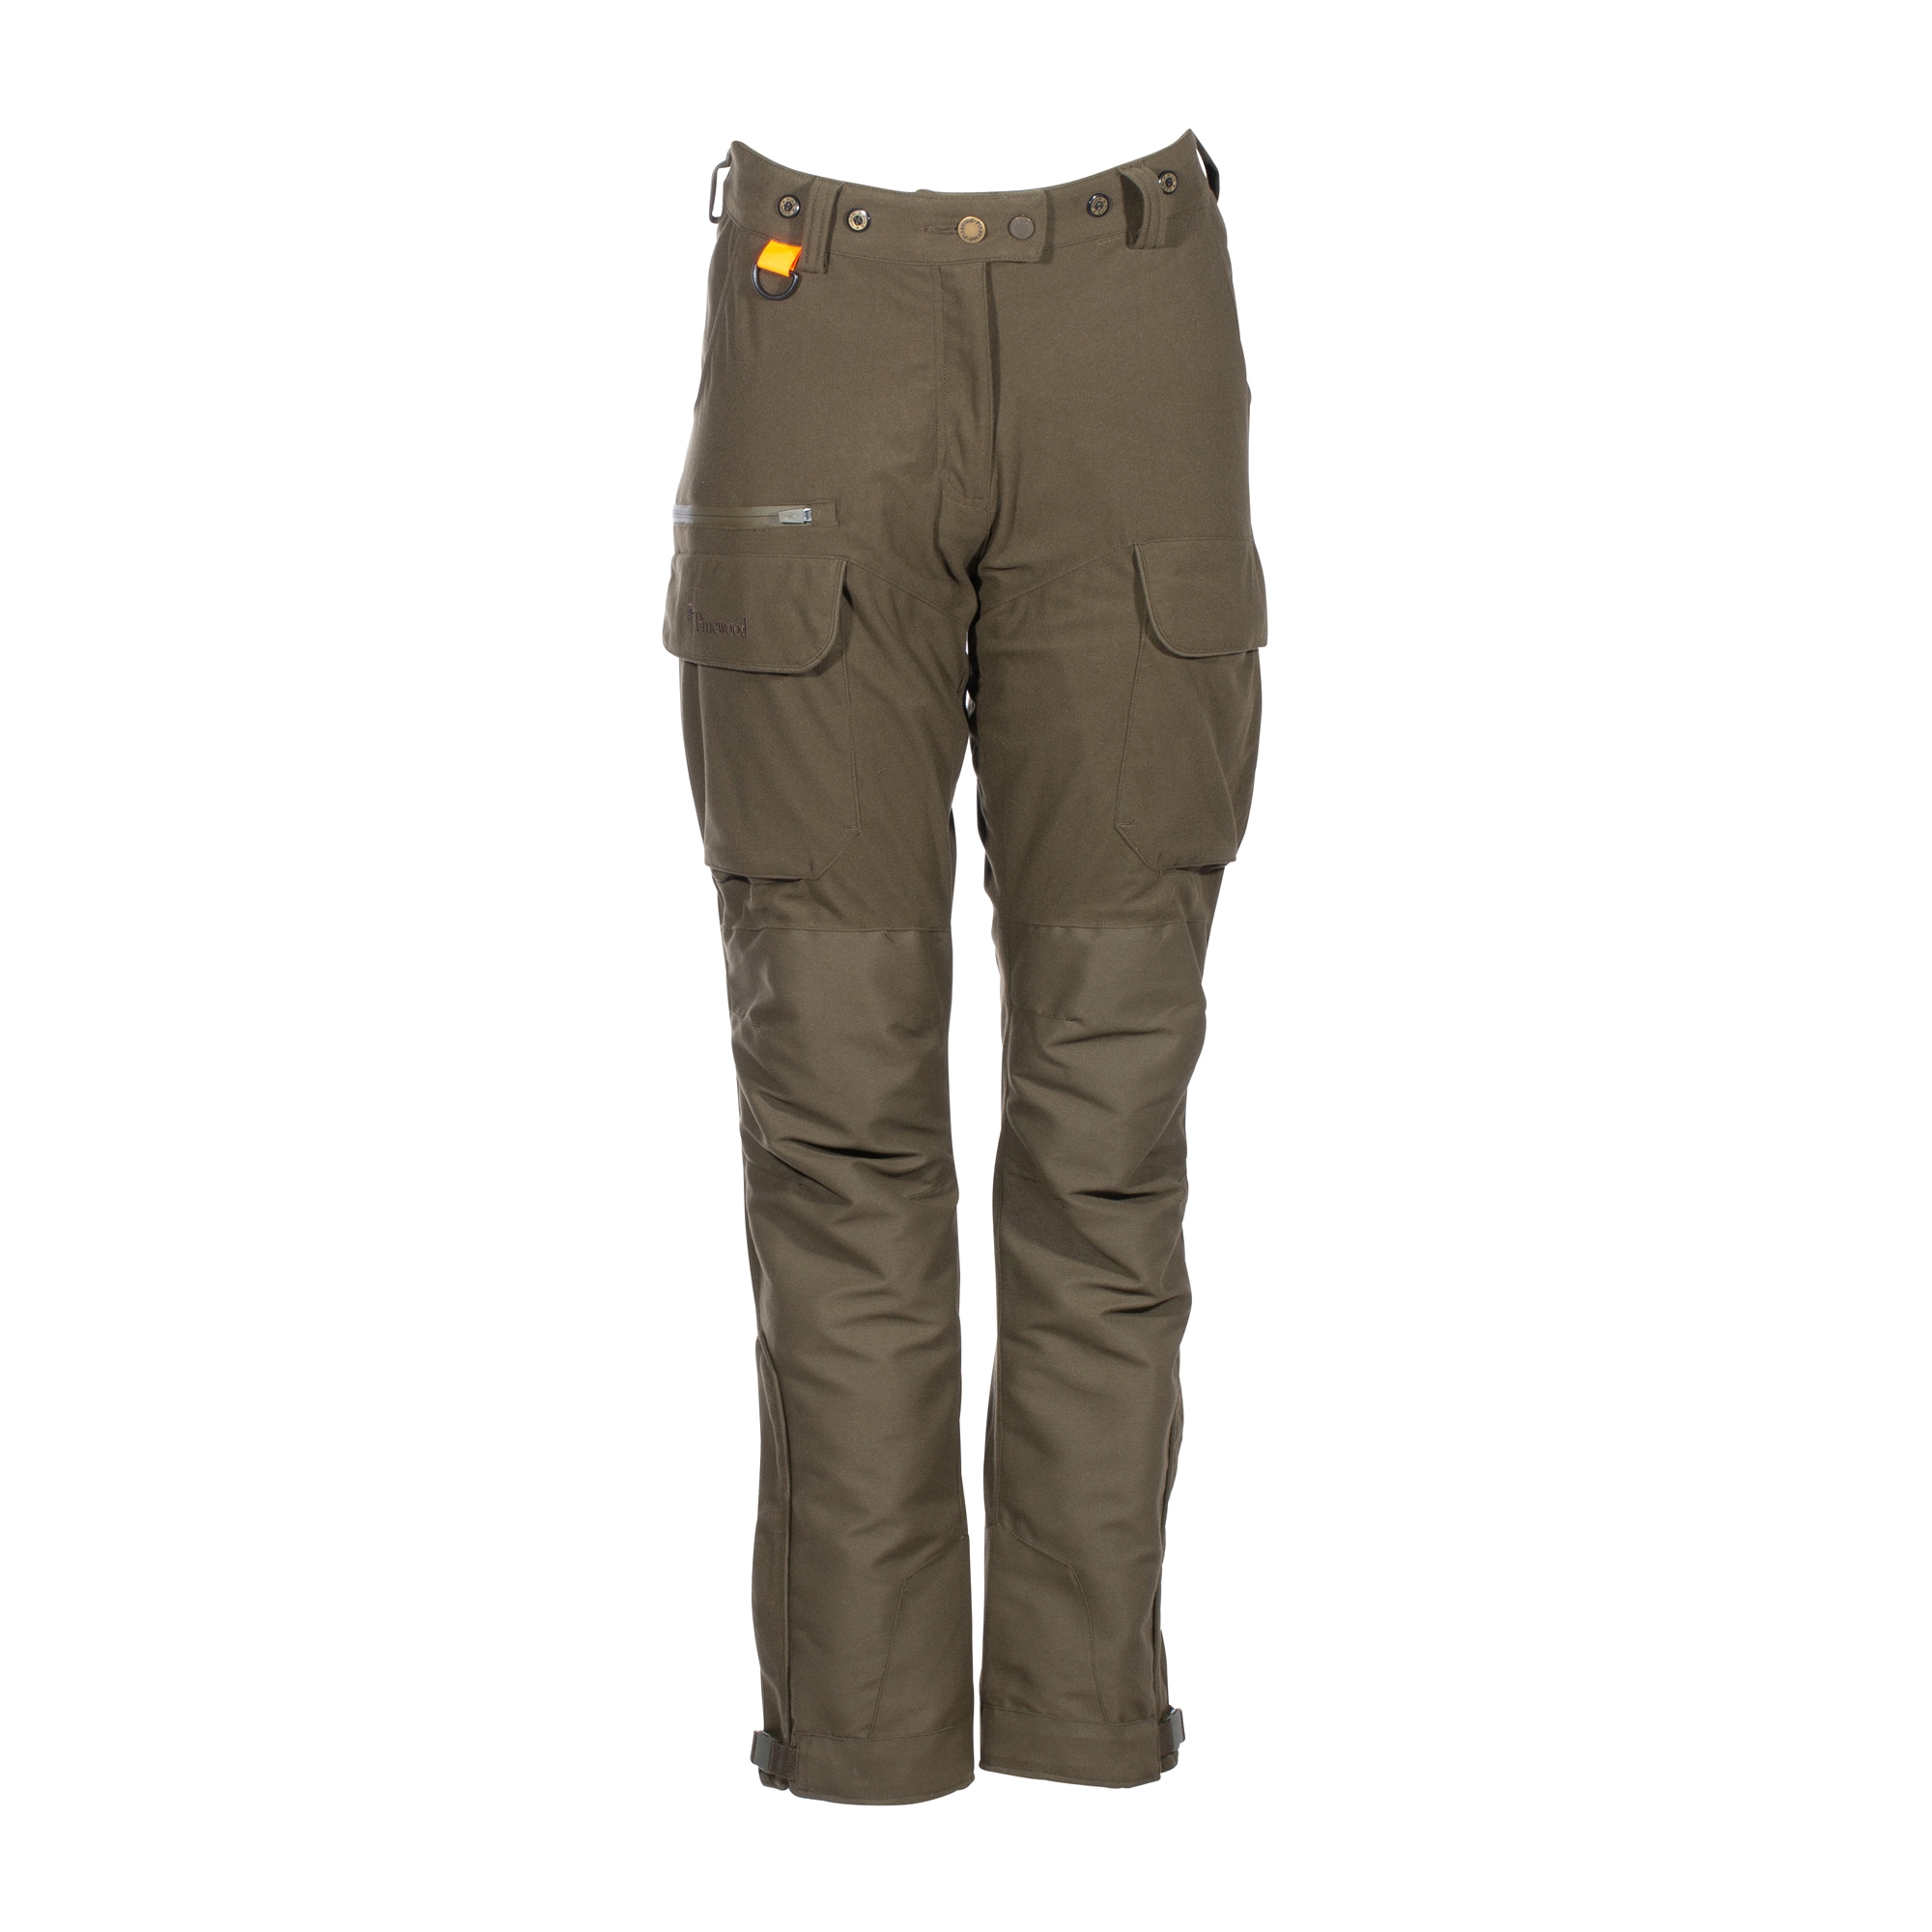 Purchase the Pinewood Ladies Pants Smaland Forest hunting green